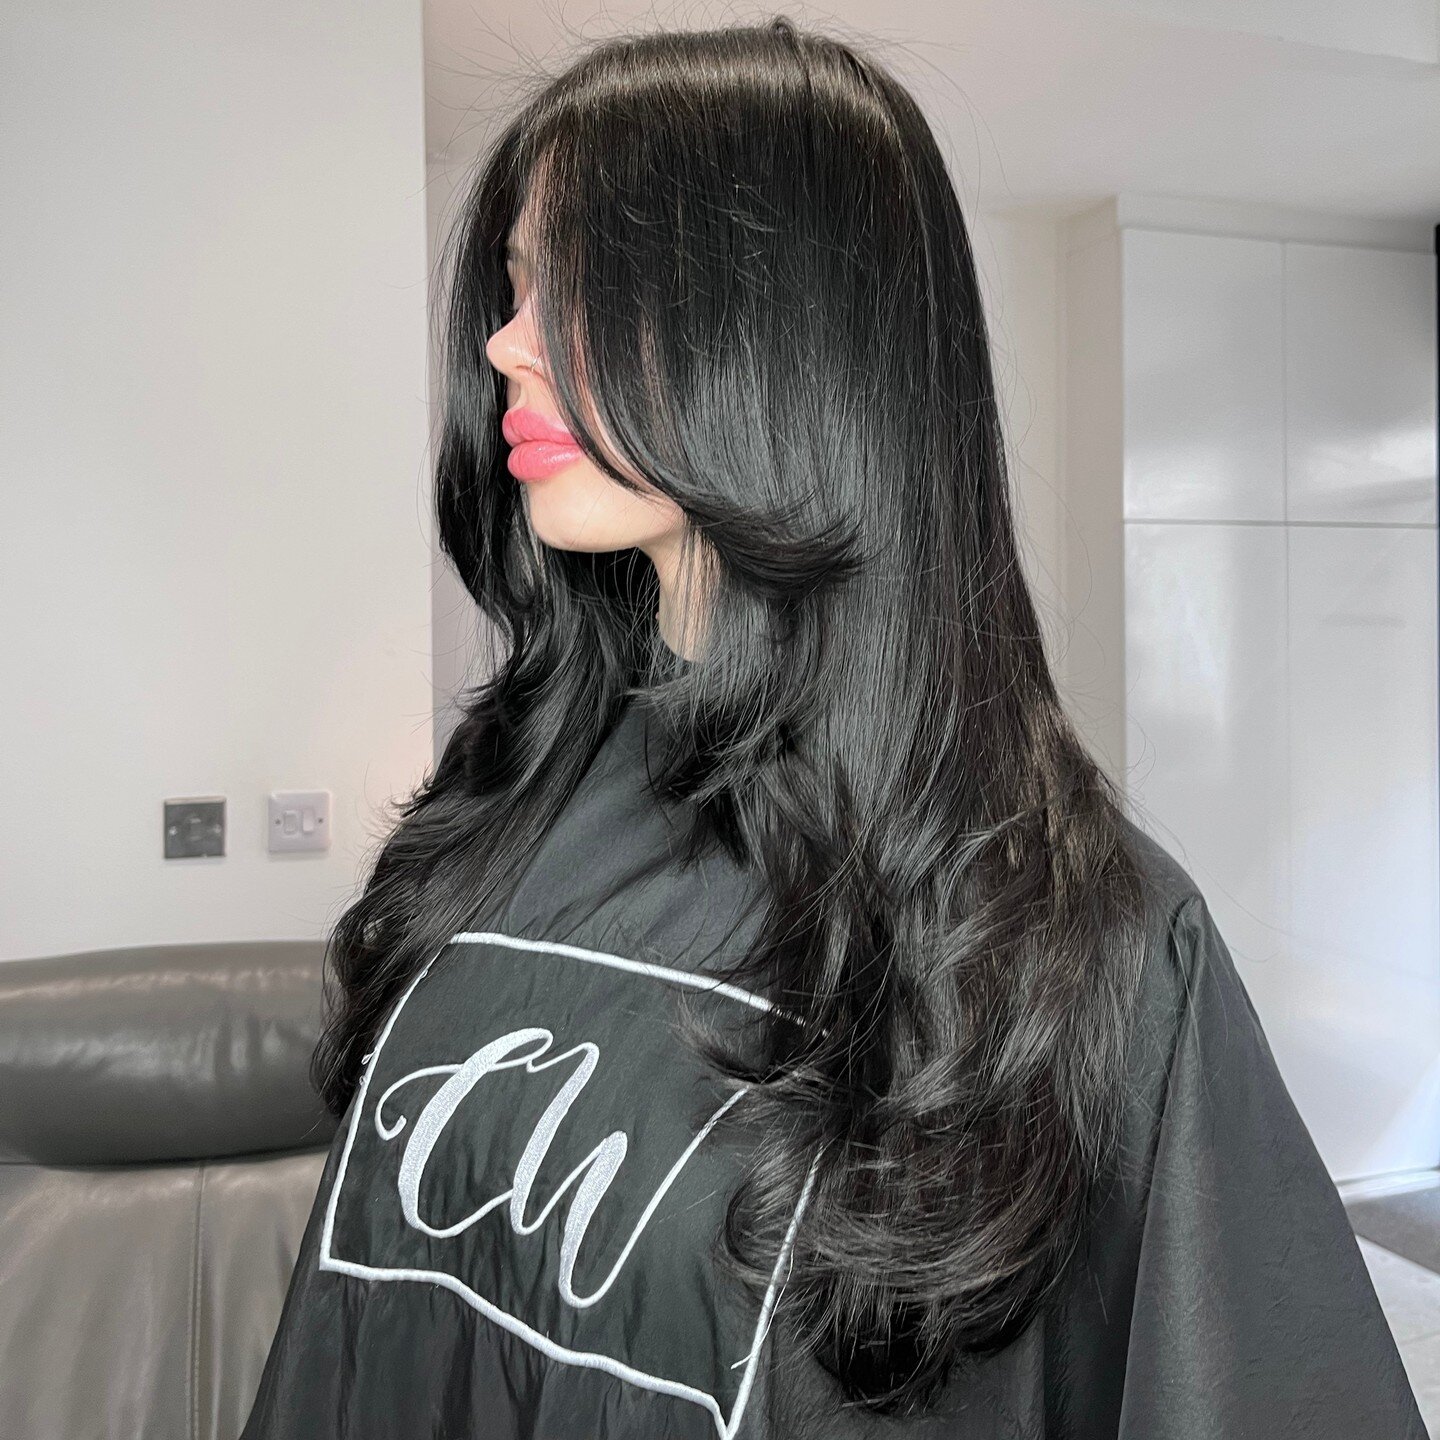 All Over Colour &amp; Gloss with a Cut 🦋🩵
Layers have been added to create that weightless look, as well as body and volume.

 
🖥️ &bull; www.carmenwalkerhair.com
📧 &bull; info@carmenwalkerhair.com

#hairstyle #instahair #hairstyles #haircolour #